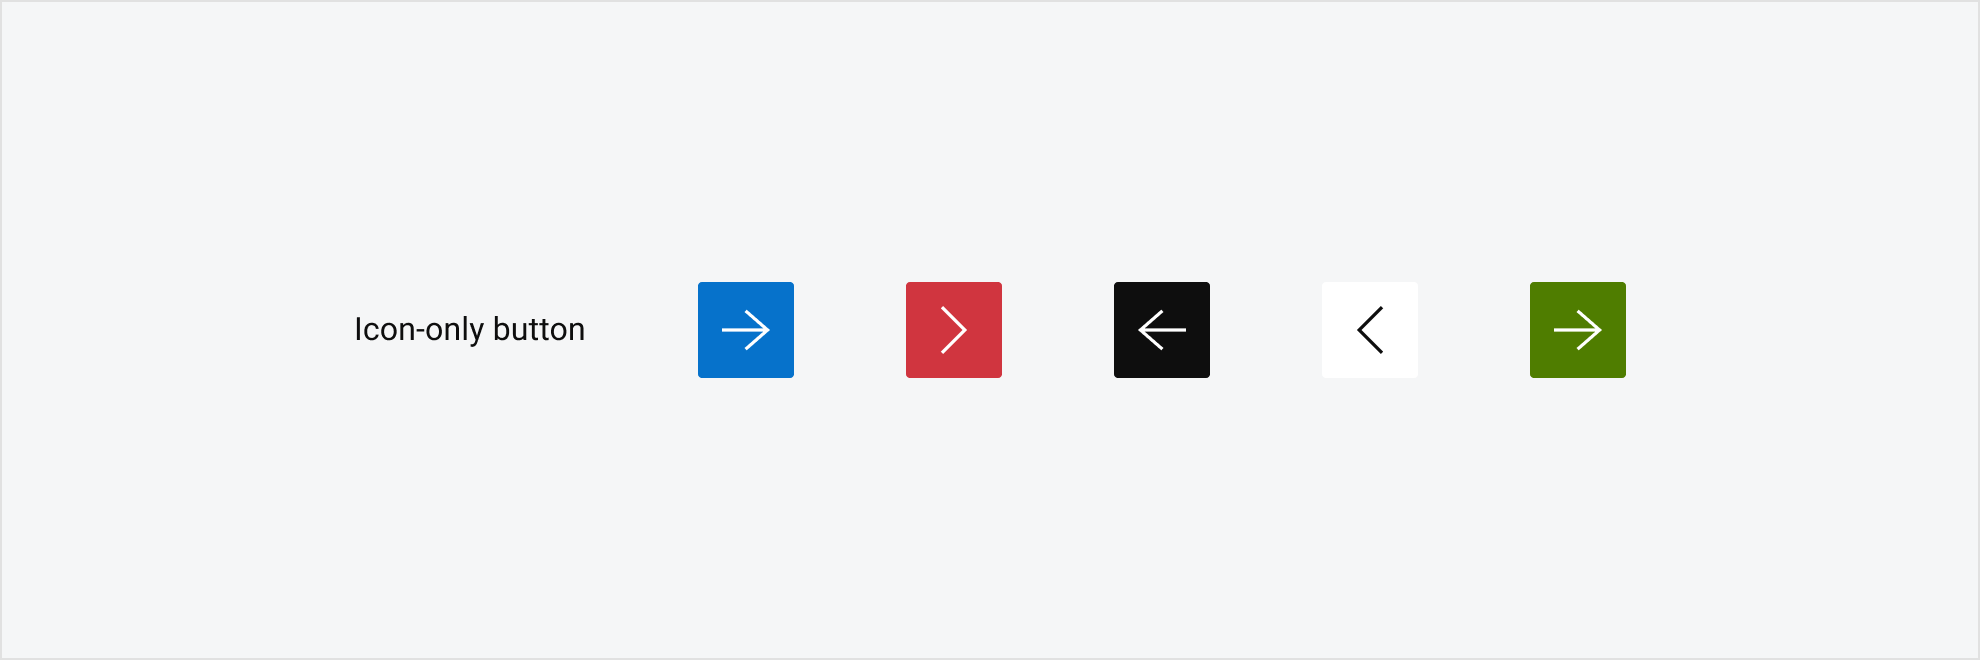 Image displaying icon-only button - in blue, red, black, white and green variations.